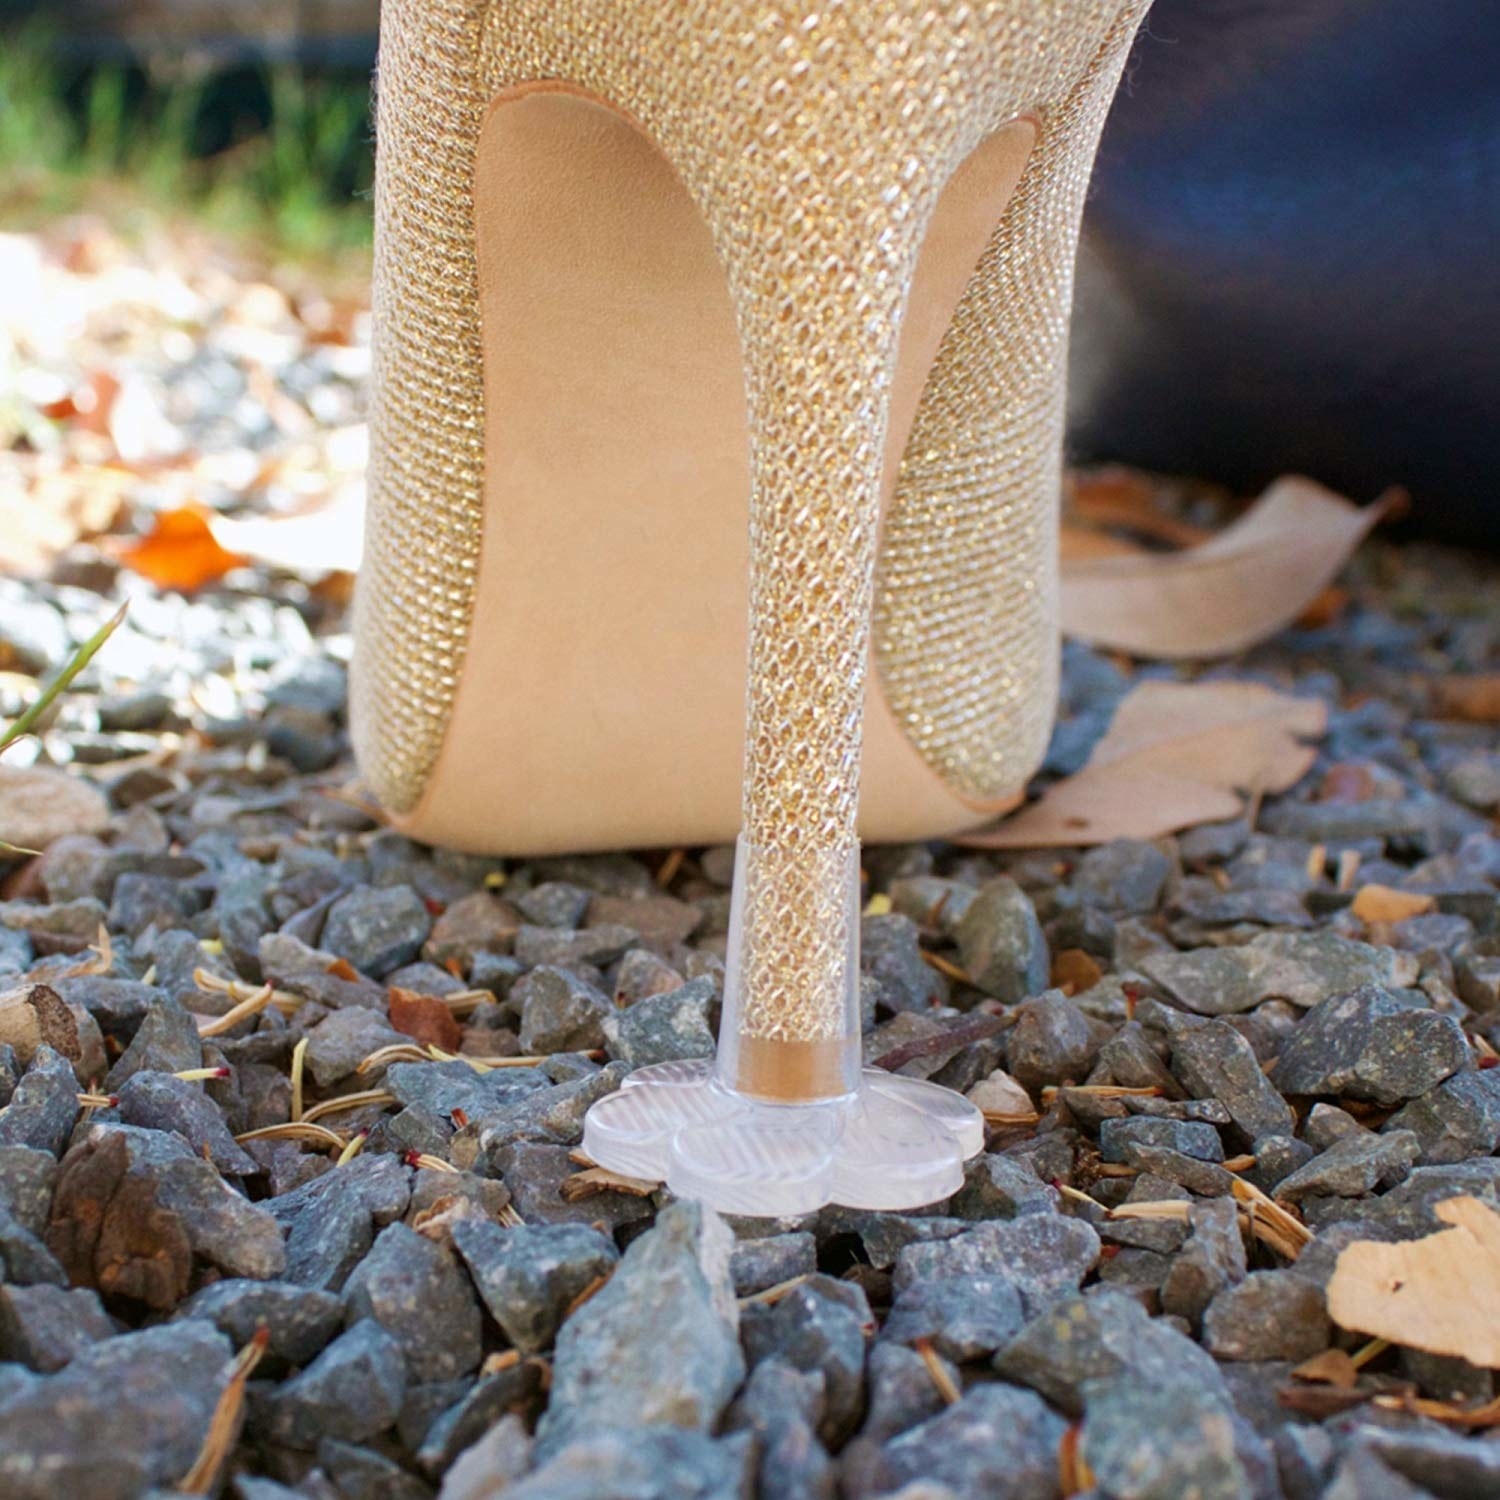 high heel with clear flower-shaped plastic cap on the end